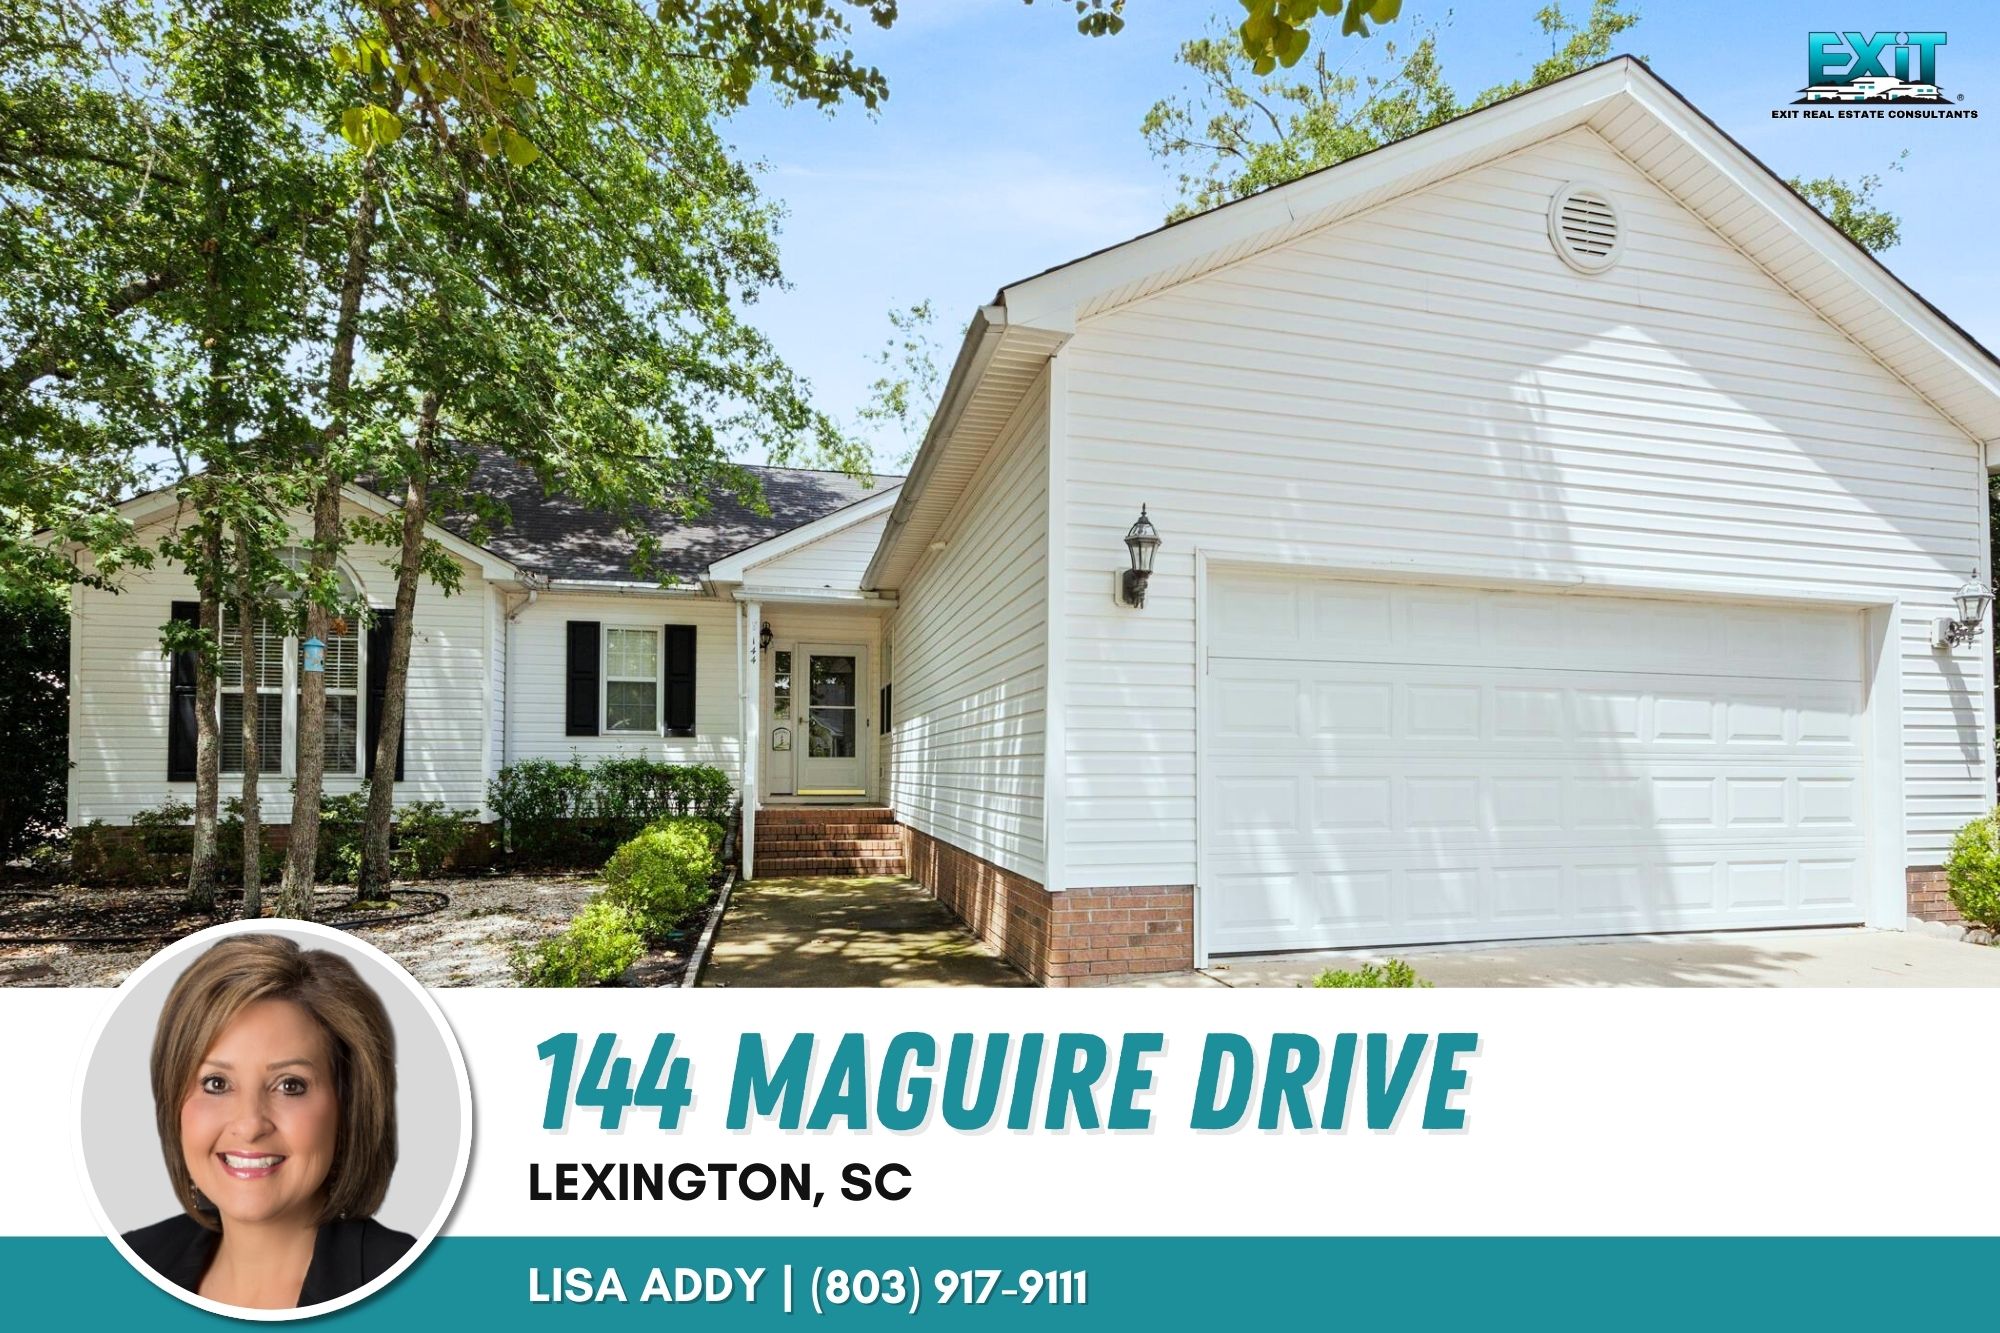 Just listed in Colony Lakes - Lexington